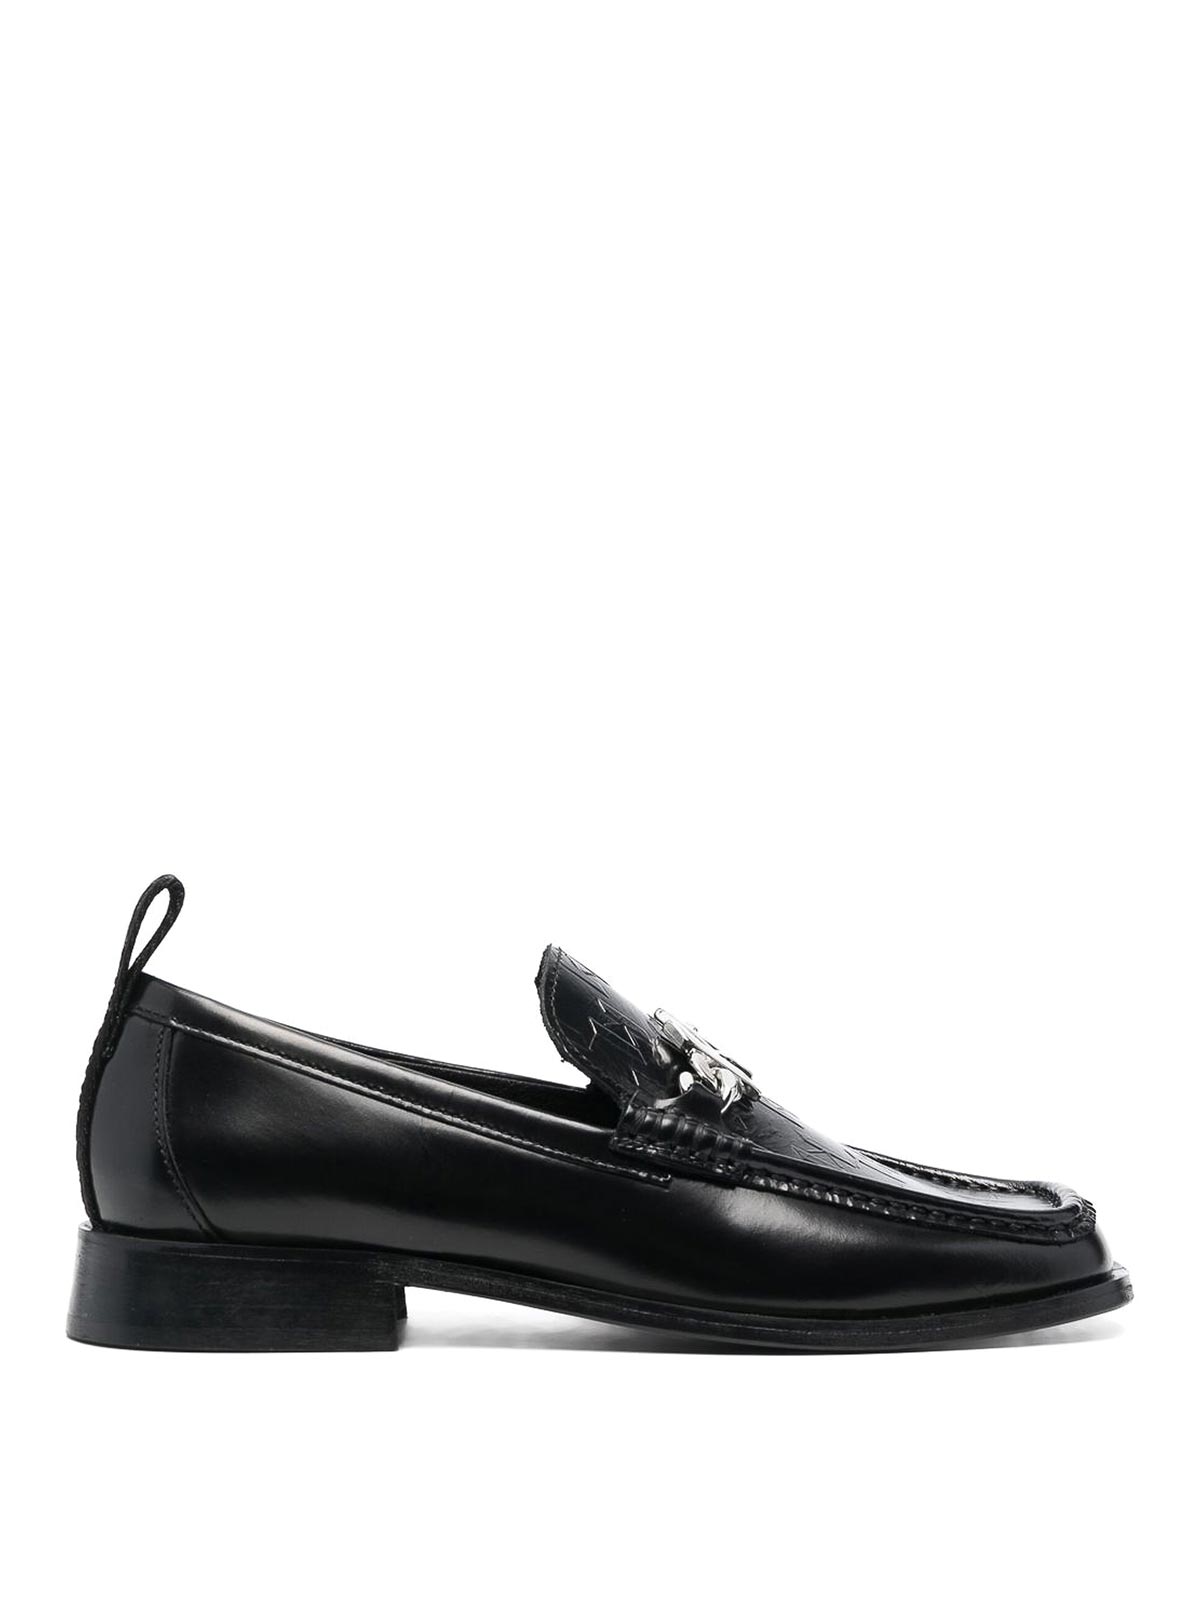 Karl Lagerfeld Black Calf Leather Monogram-plaque Loafers.